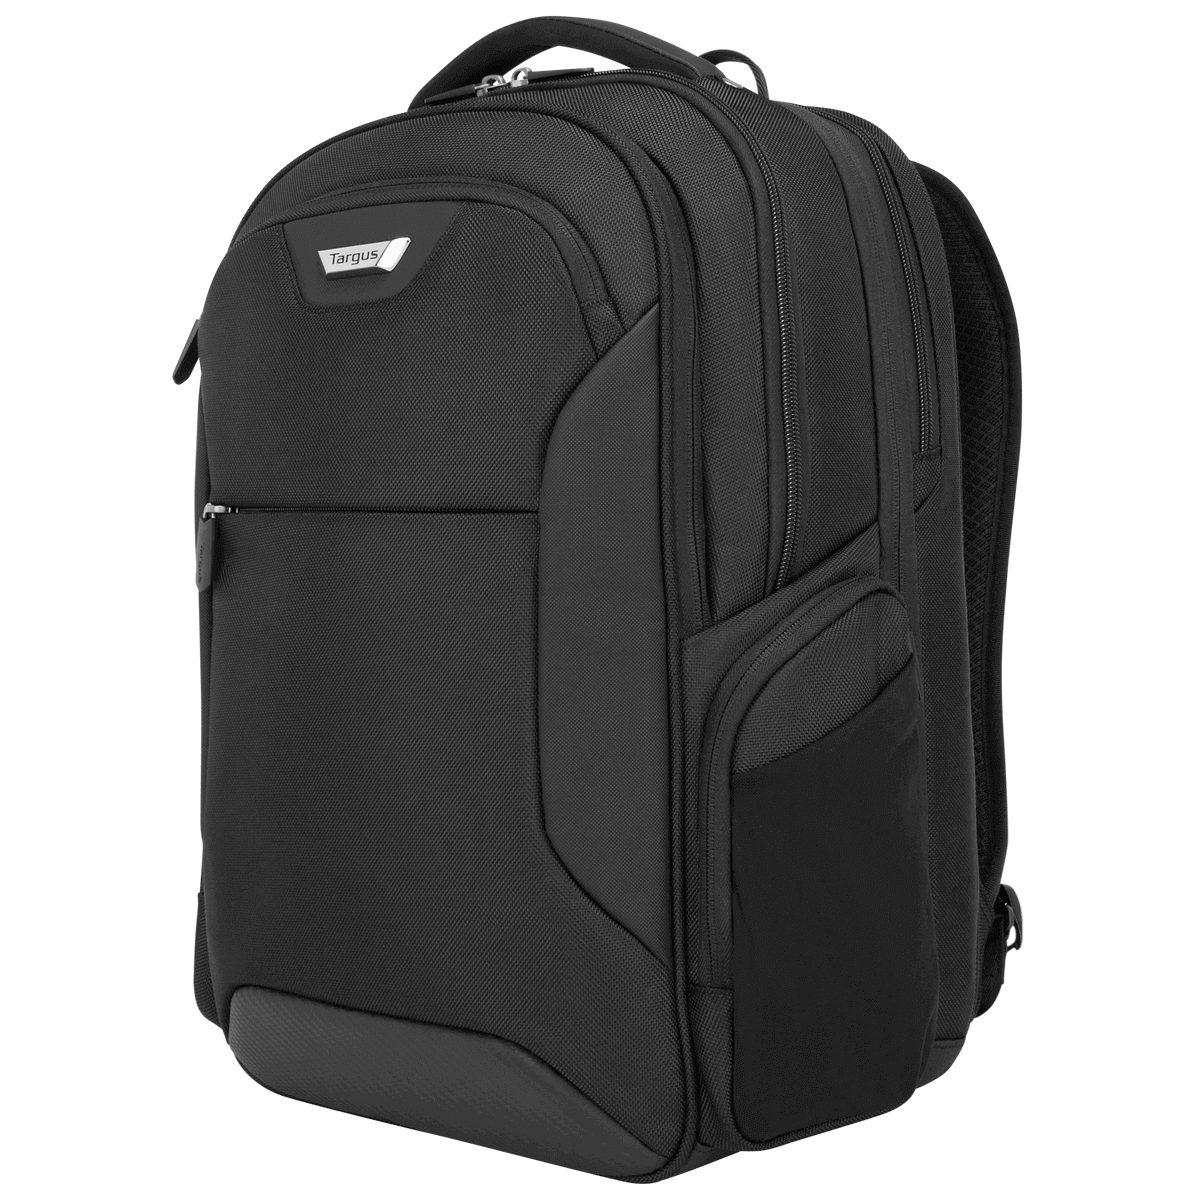 Spruce | Checkpoint-Friendly EcoSmart Backpack Targus 15.6-inch